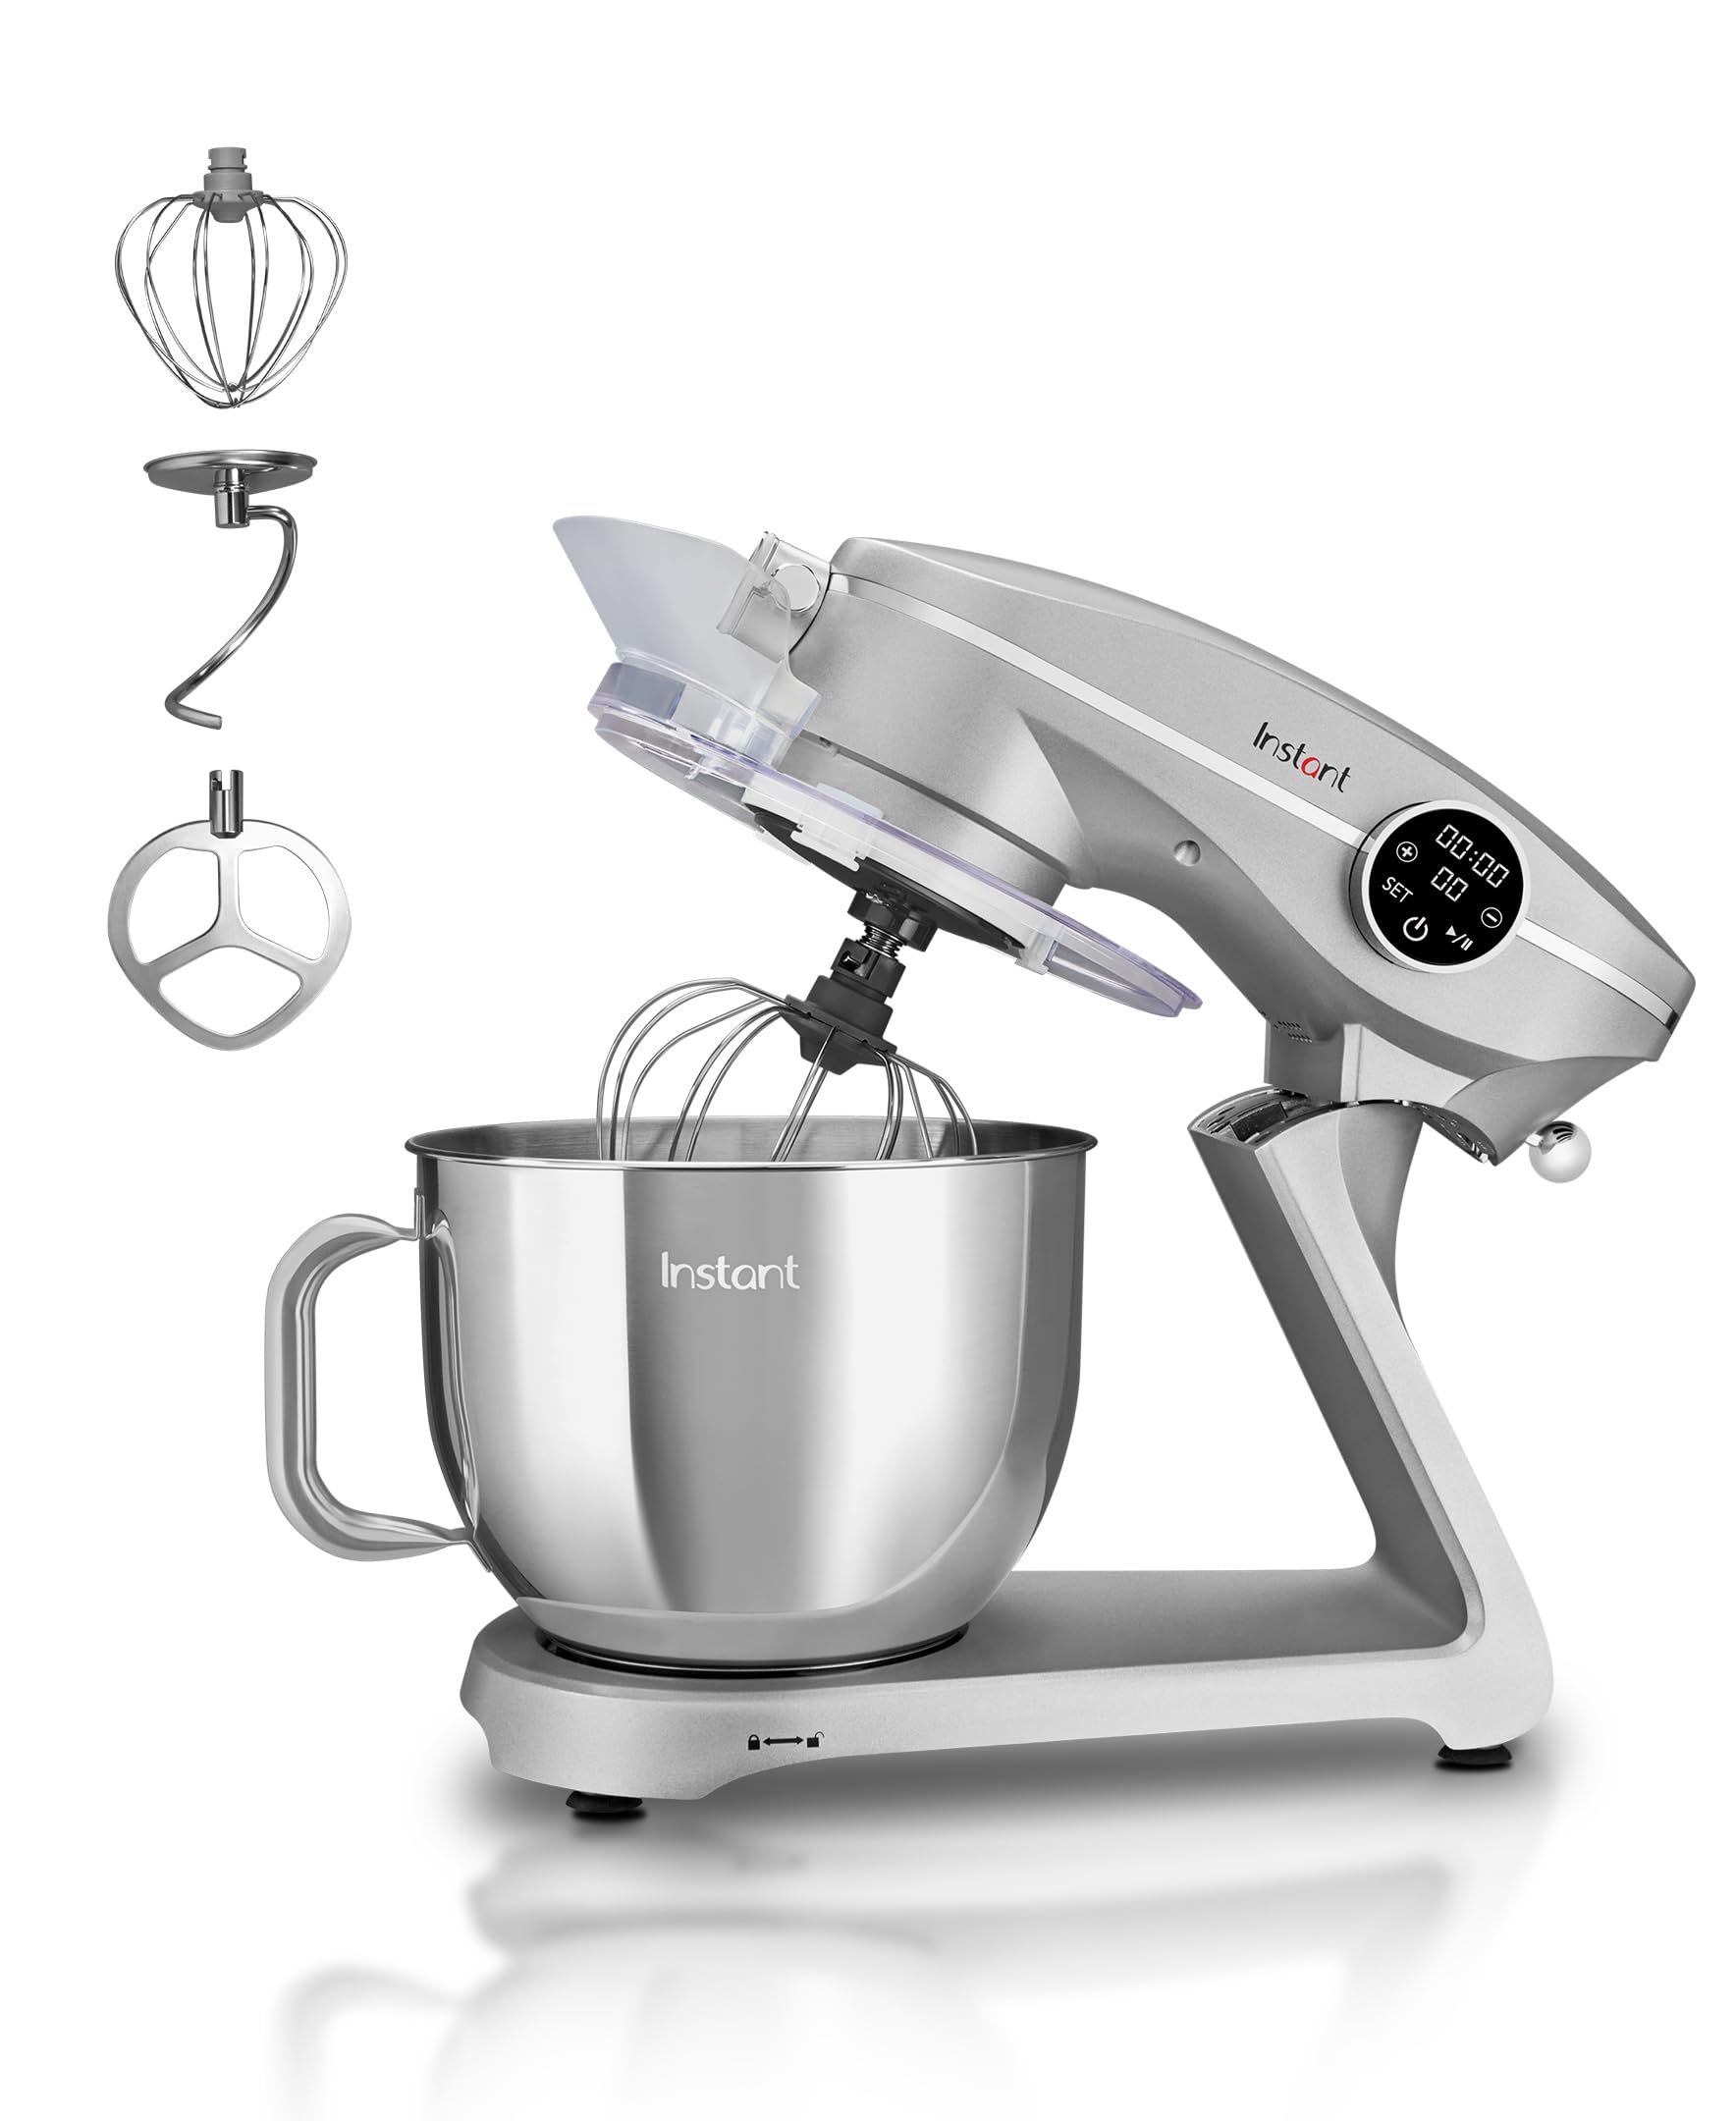 Instant Pot Stand Mixer Pro,600W 10-Speed Electric Mixer with Digital Interface,7.4-Qt Stainless Steel Bowl,From the Makers of Instant Pot,Dishwasher Safe Whisk,Dough Hook and Mixing Paddle,Silver